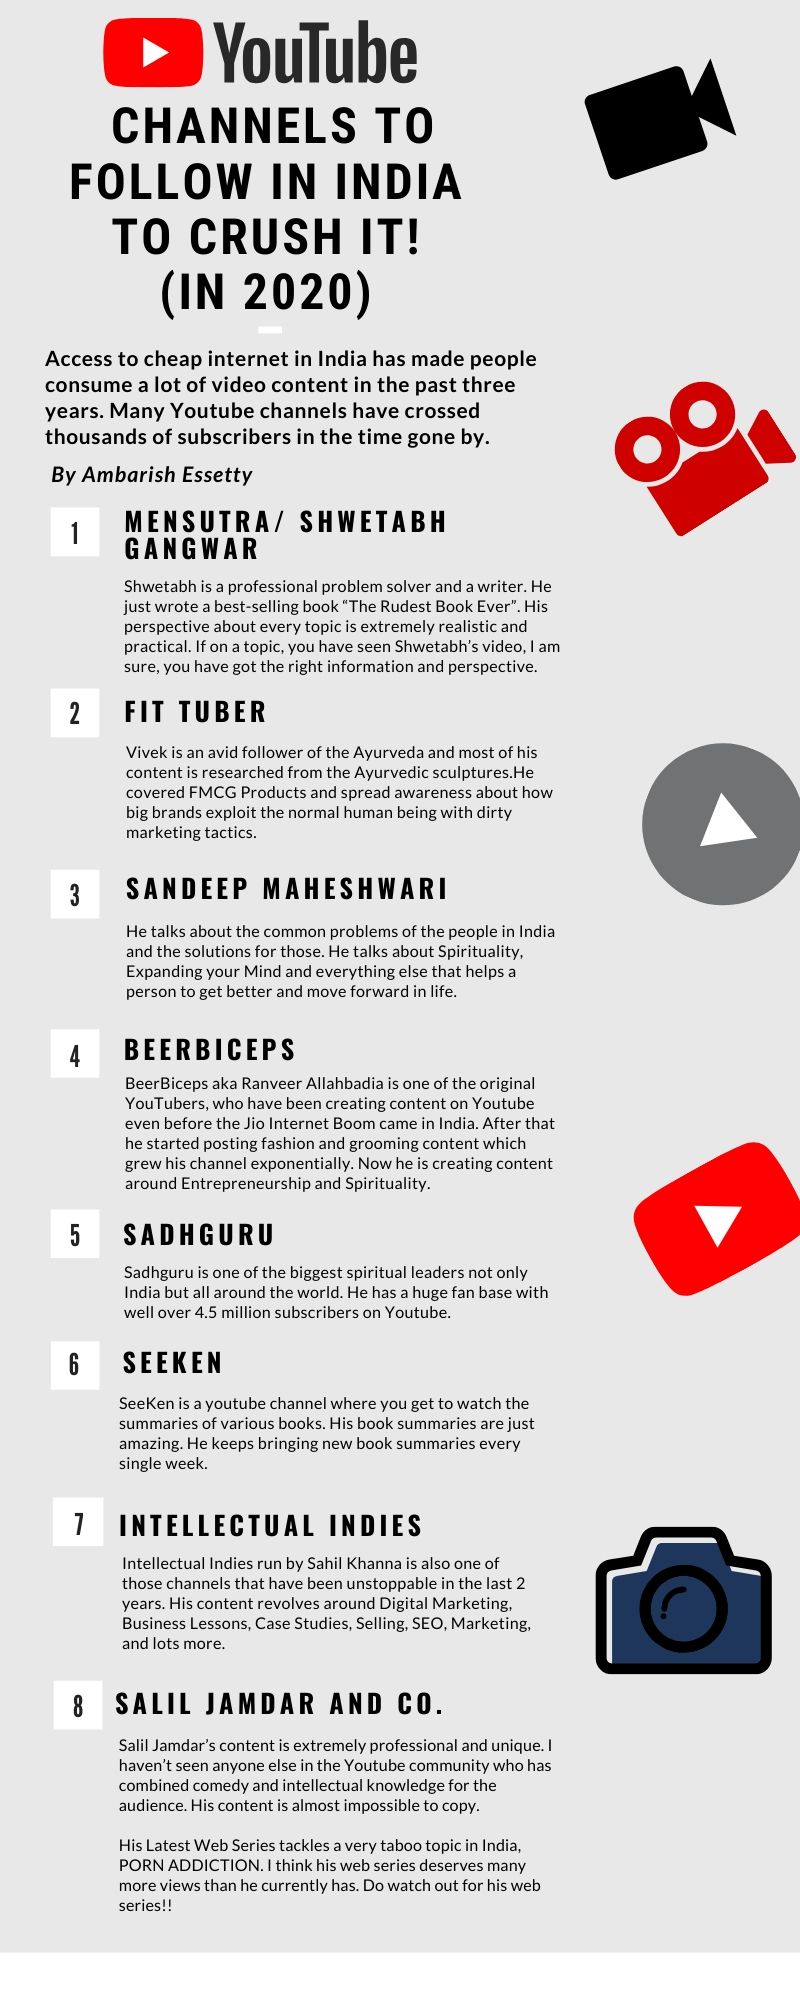 Youtube Channels to follow IN INDIA (IN 2020)